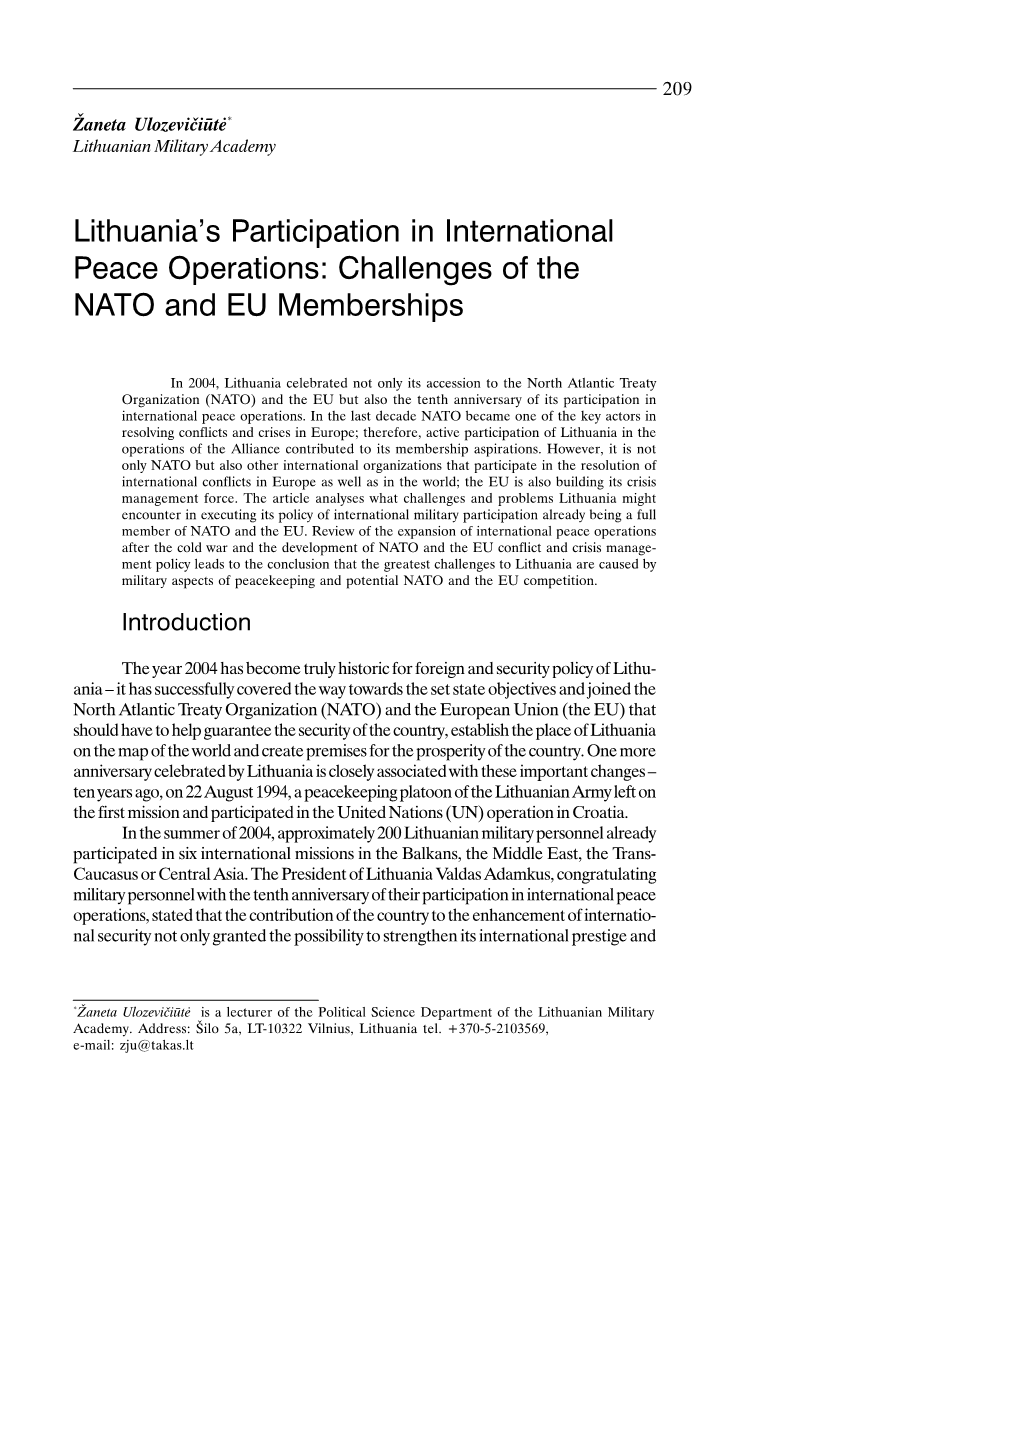 Lithuania's Participation in International Peace Operations: Challenges of the NATO and EU Memberships